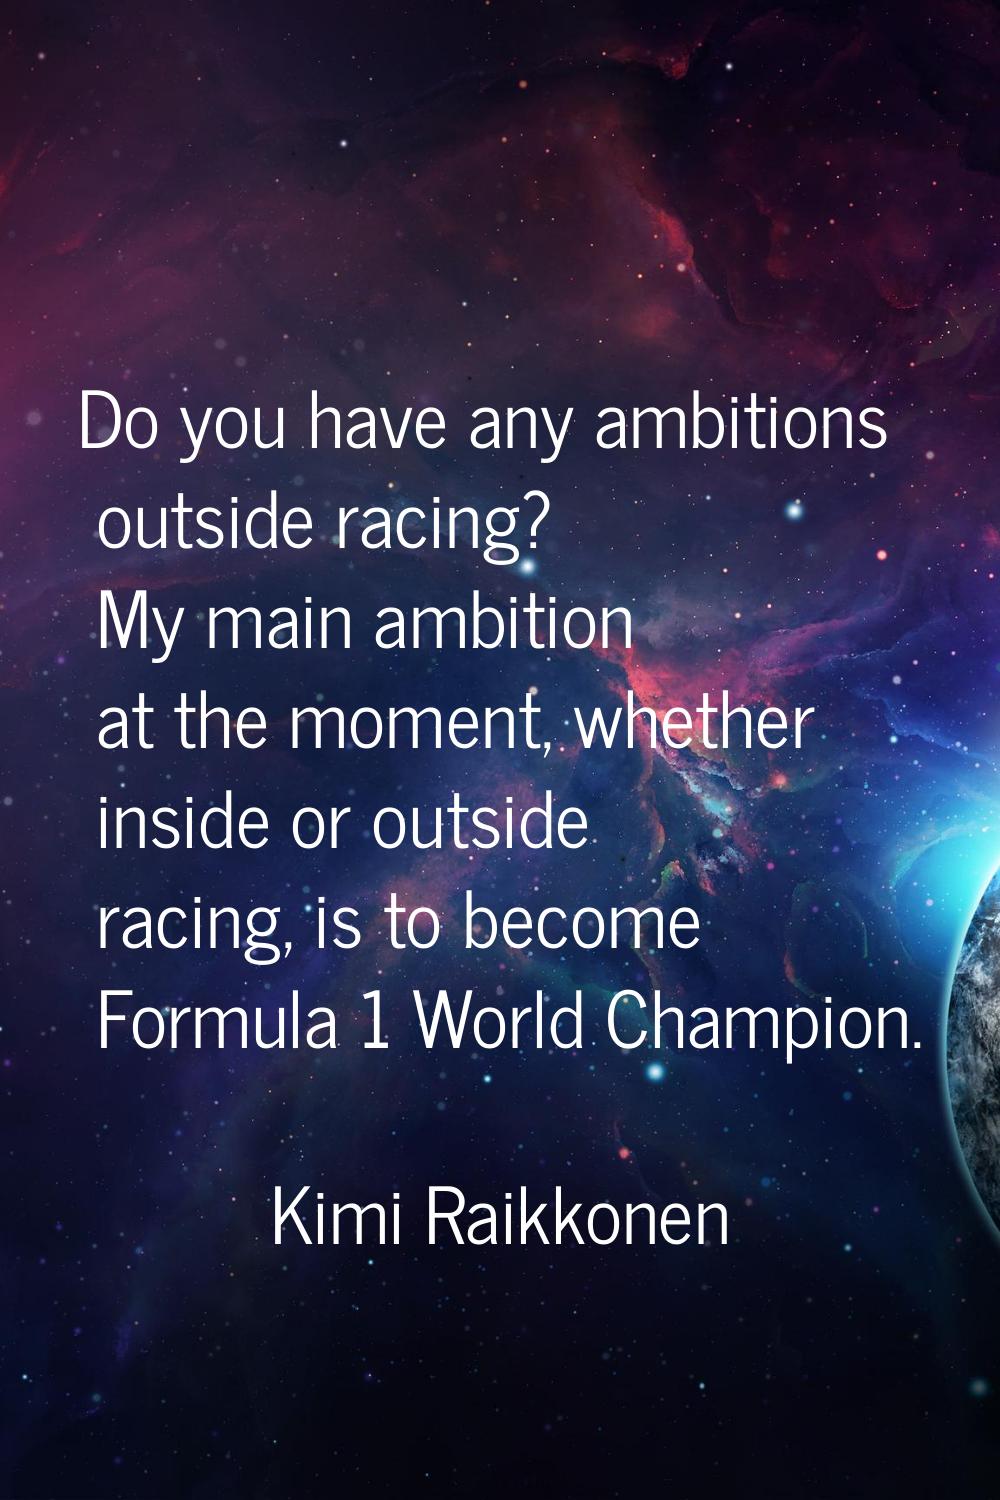 Do you have any ambitions outside racing? My main ambition at the moment, whether inside or outside